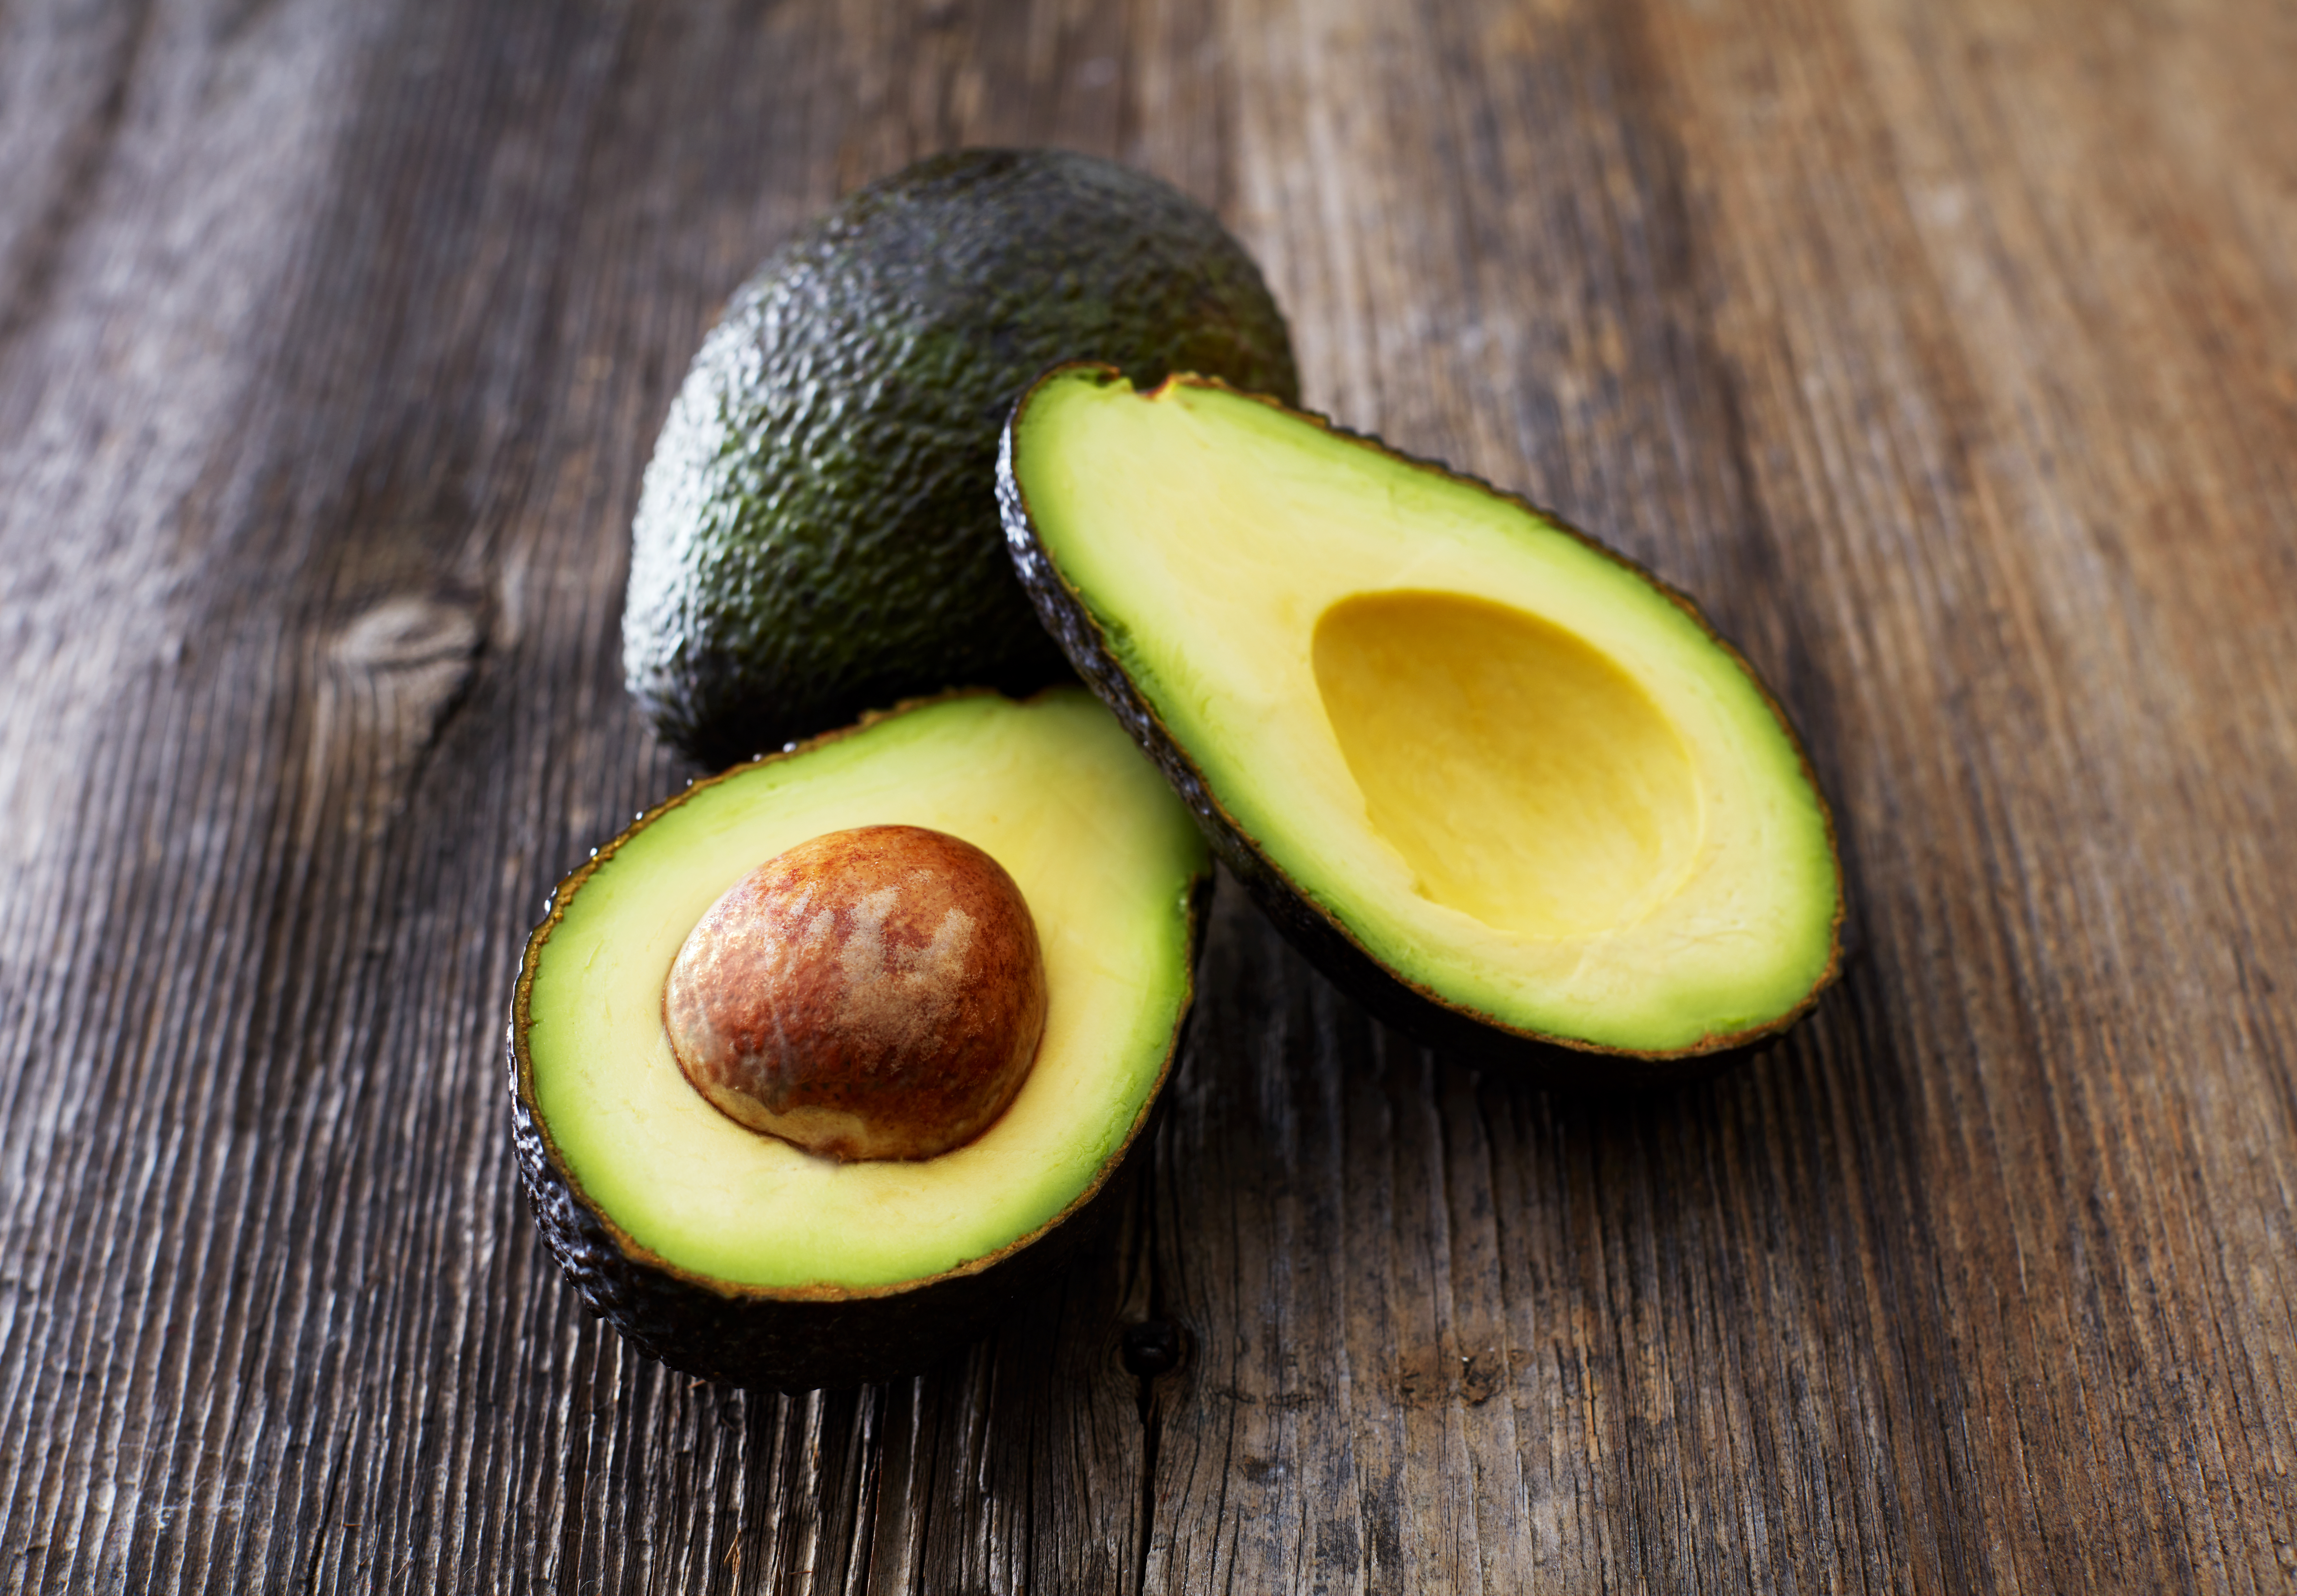 Avocados are full of vitamins, including C, E, K, B3, B5 and B6